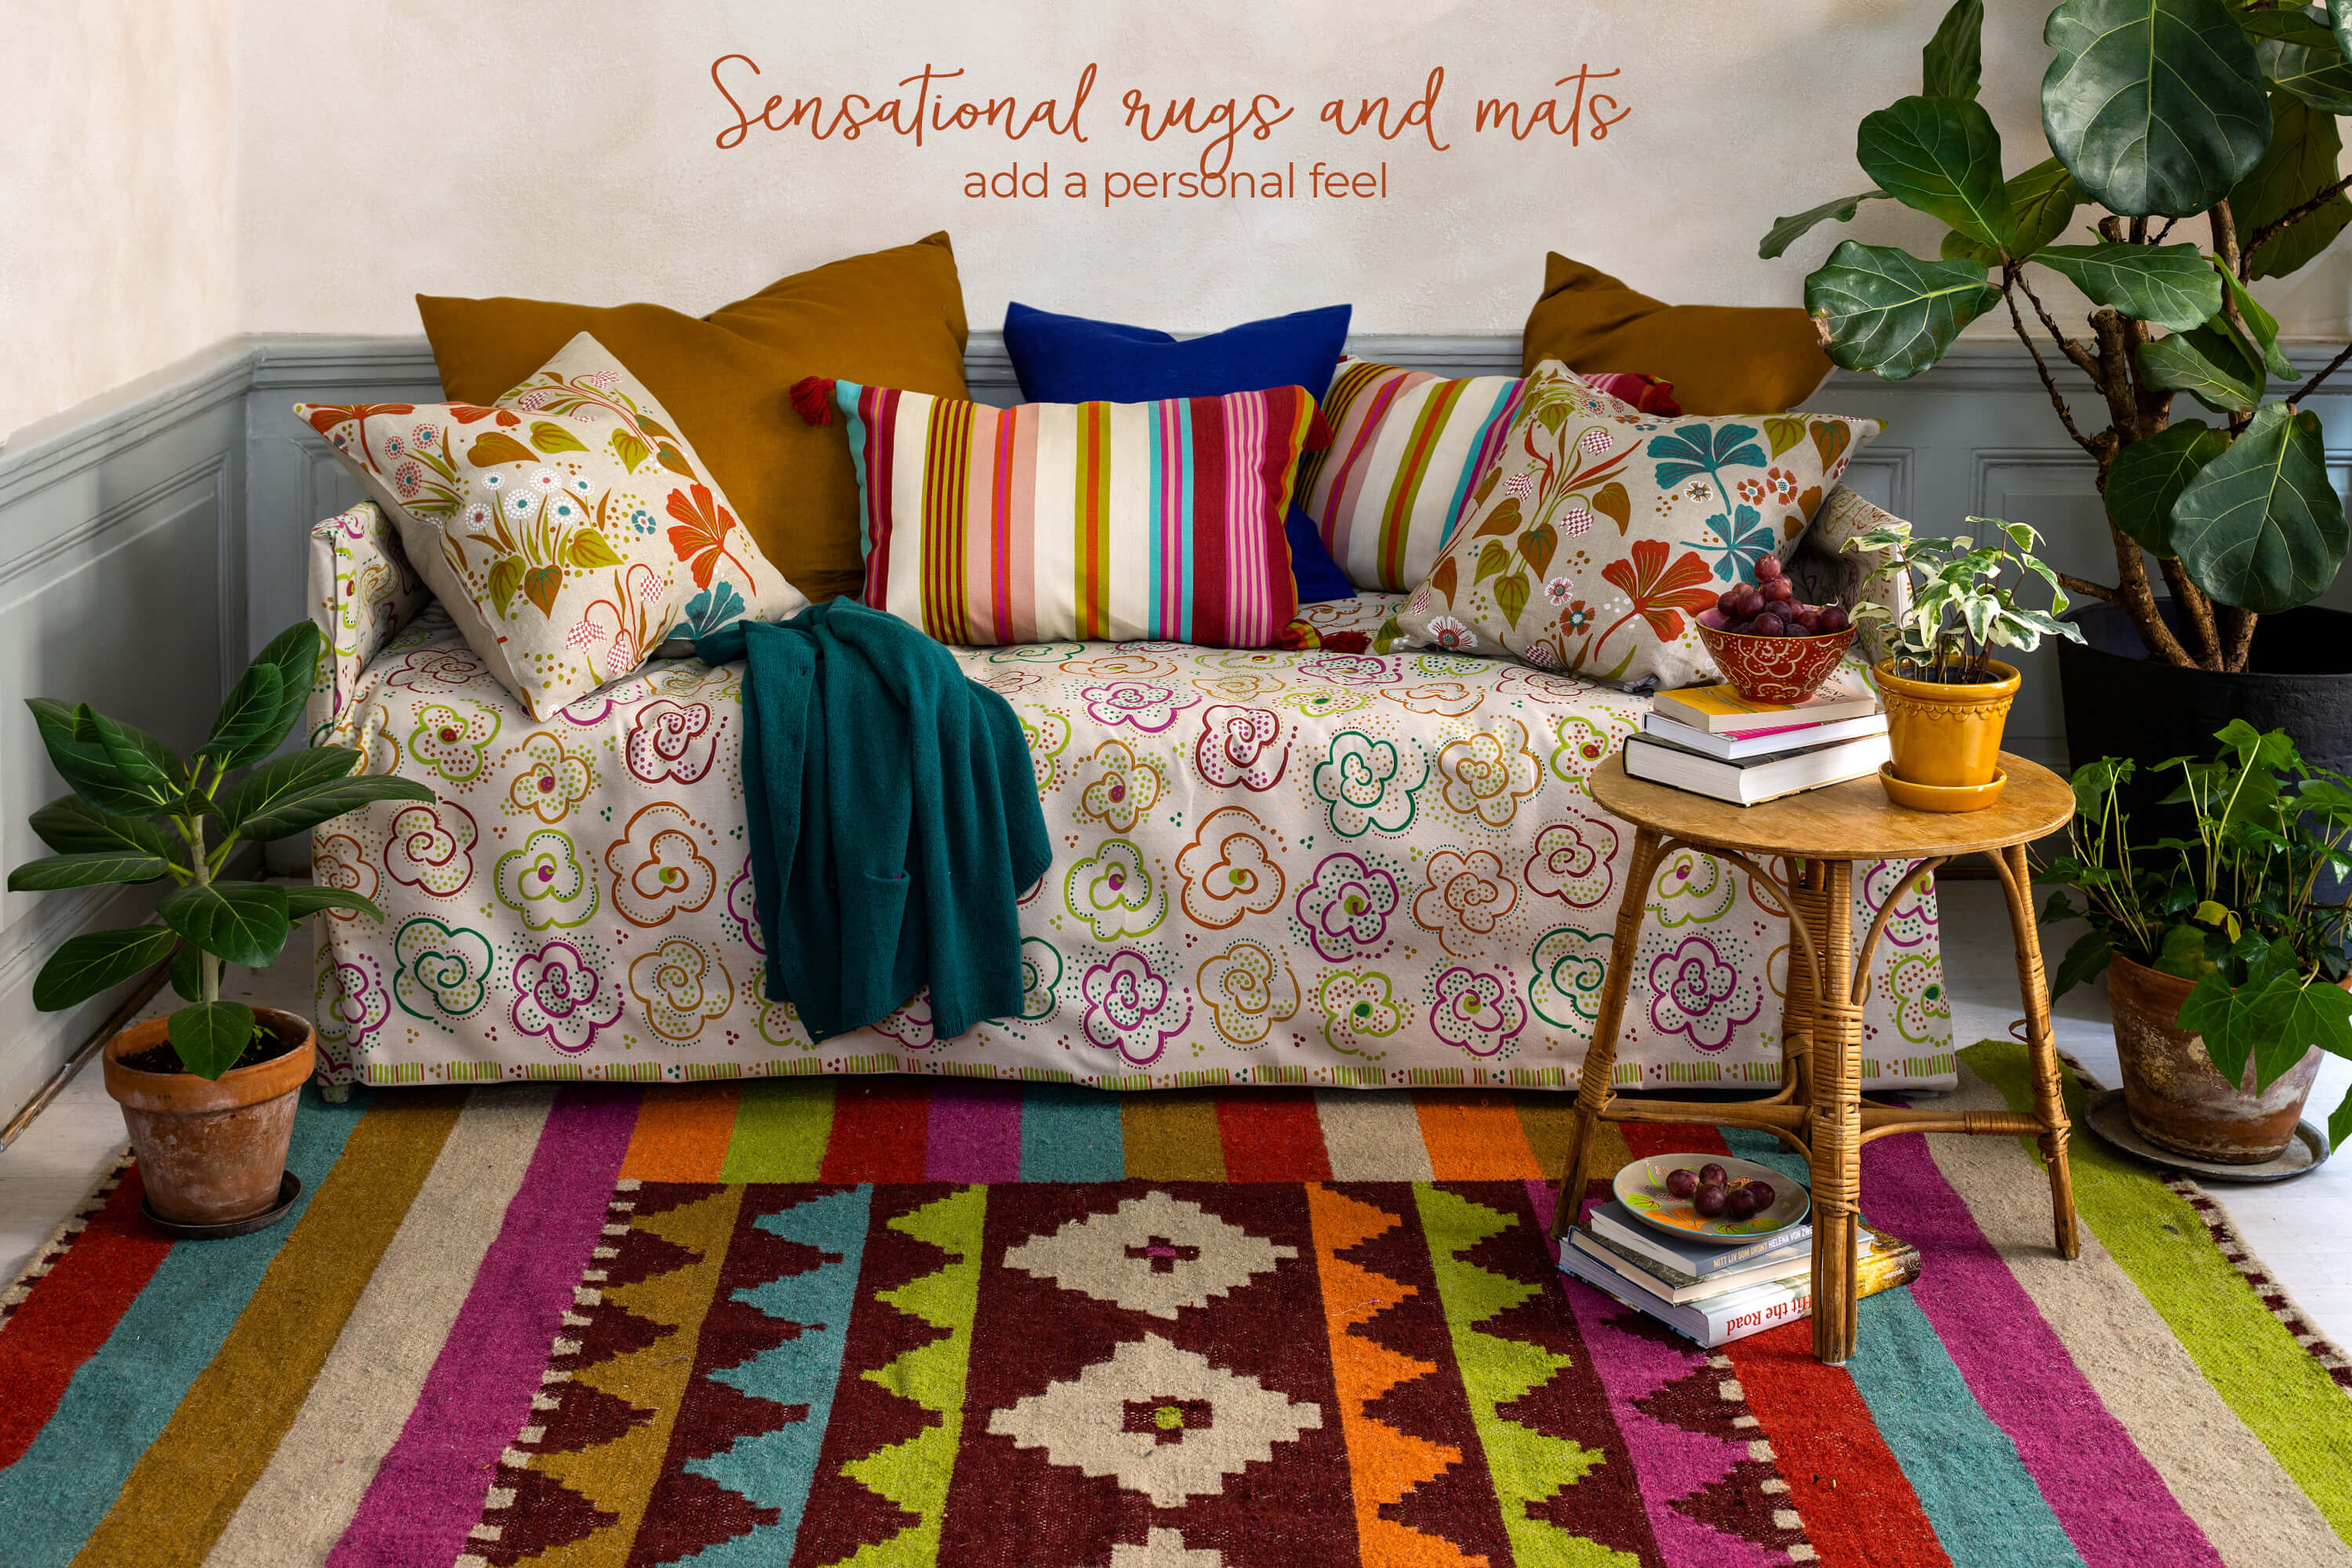 Sensational rugs and mats add a personal feel